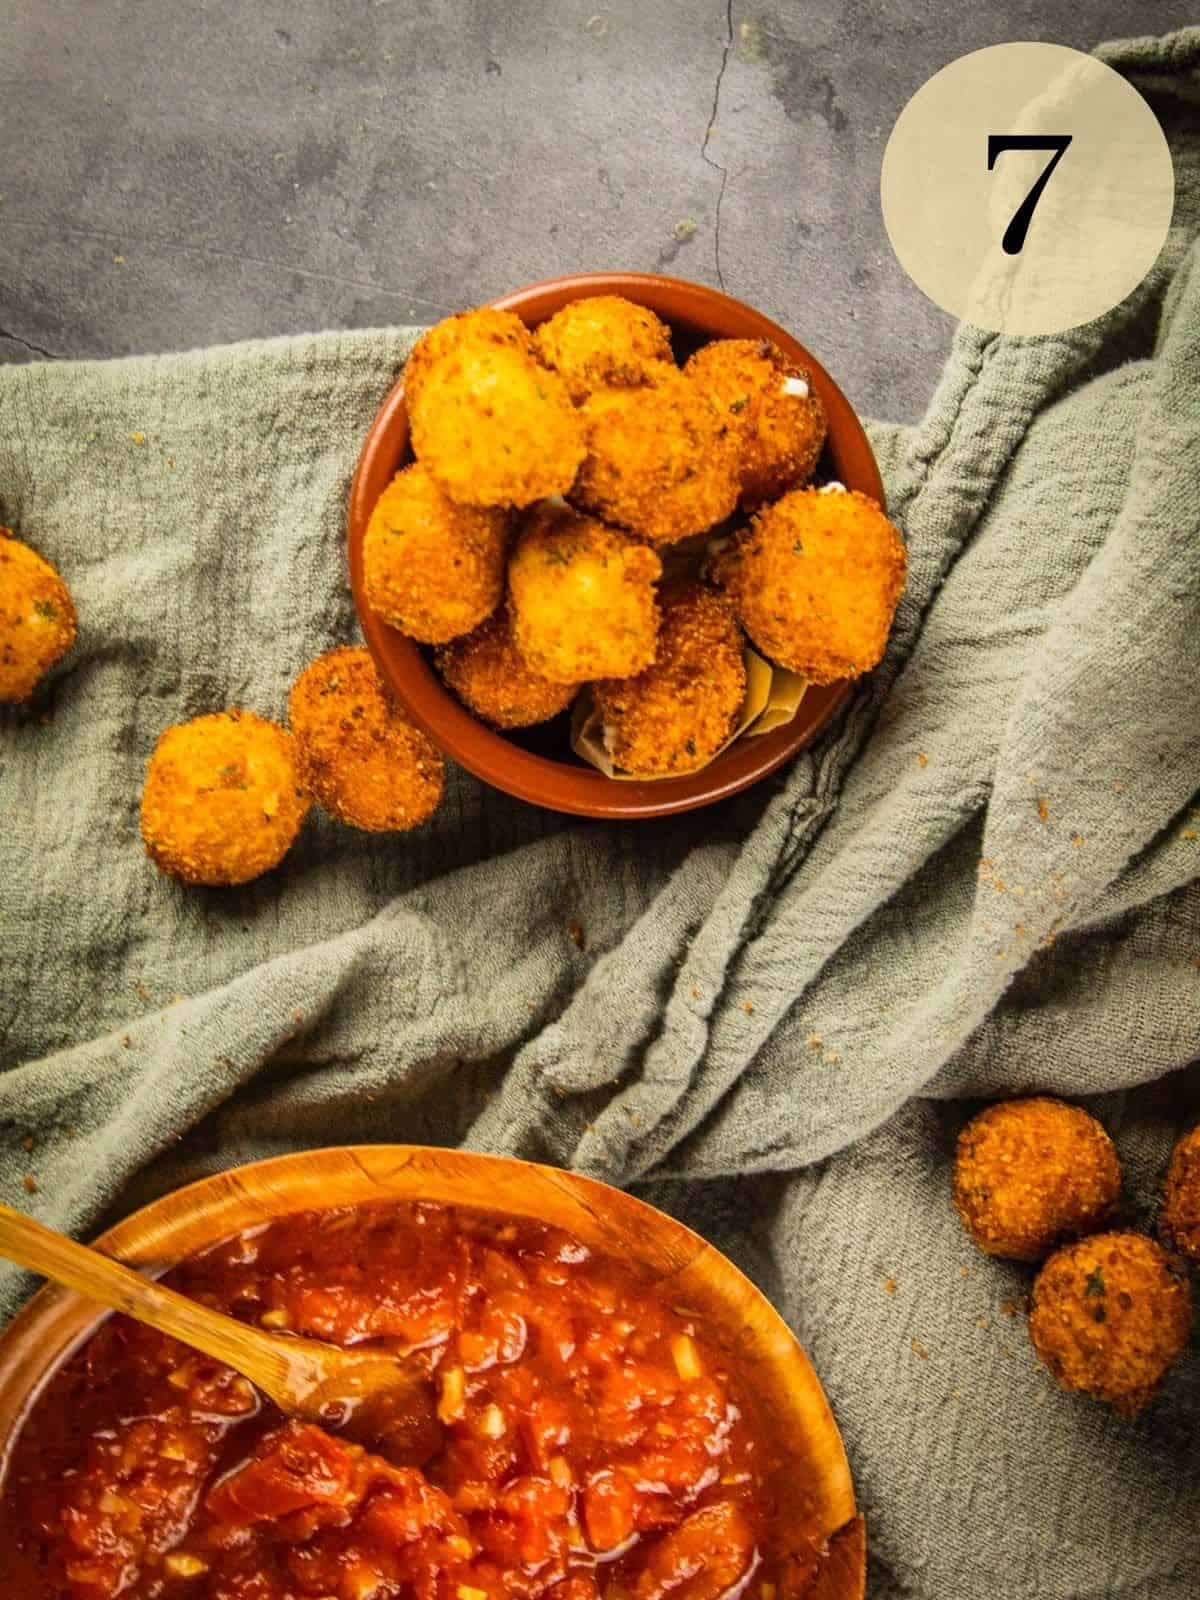 fried goat cheese balls in a small dish next to a bowl of arrabiata dipping sauce.